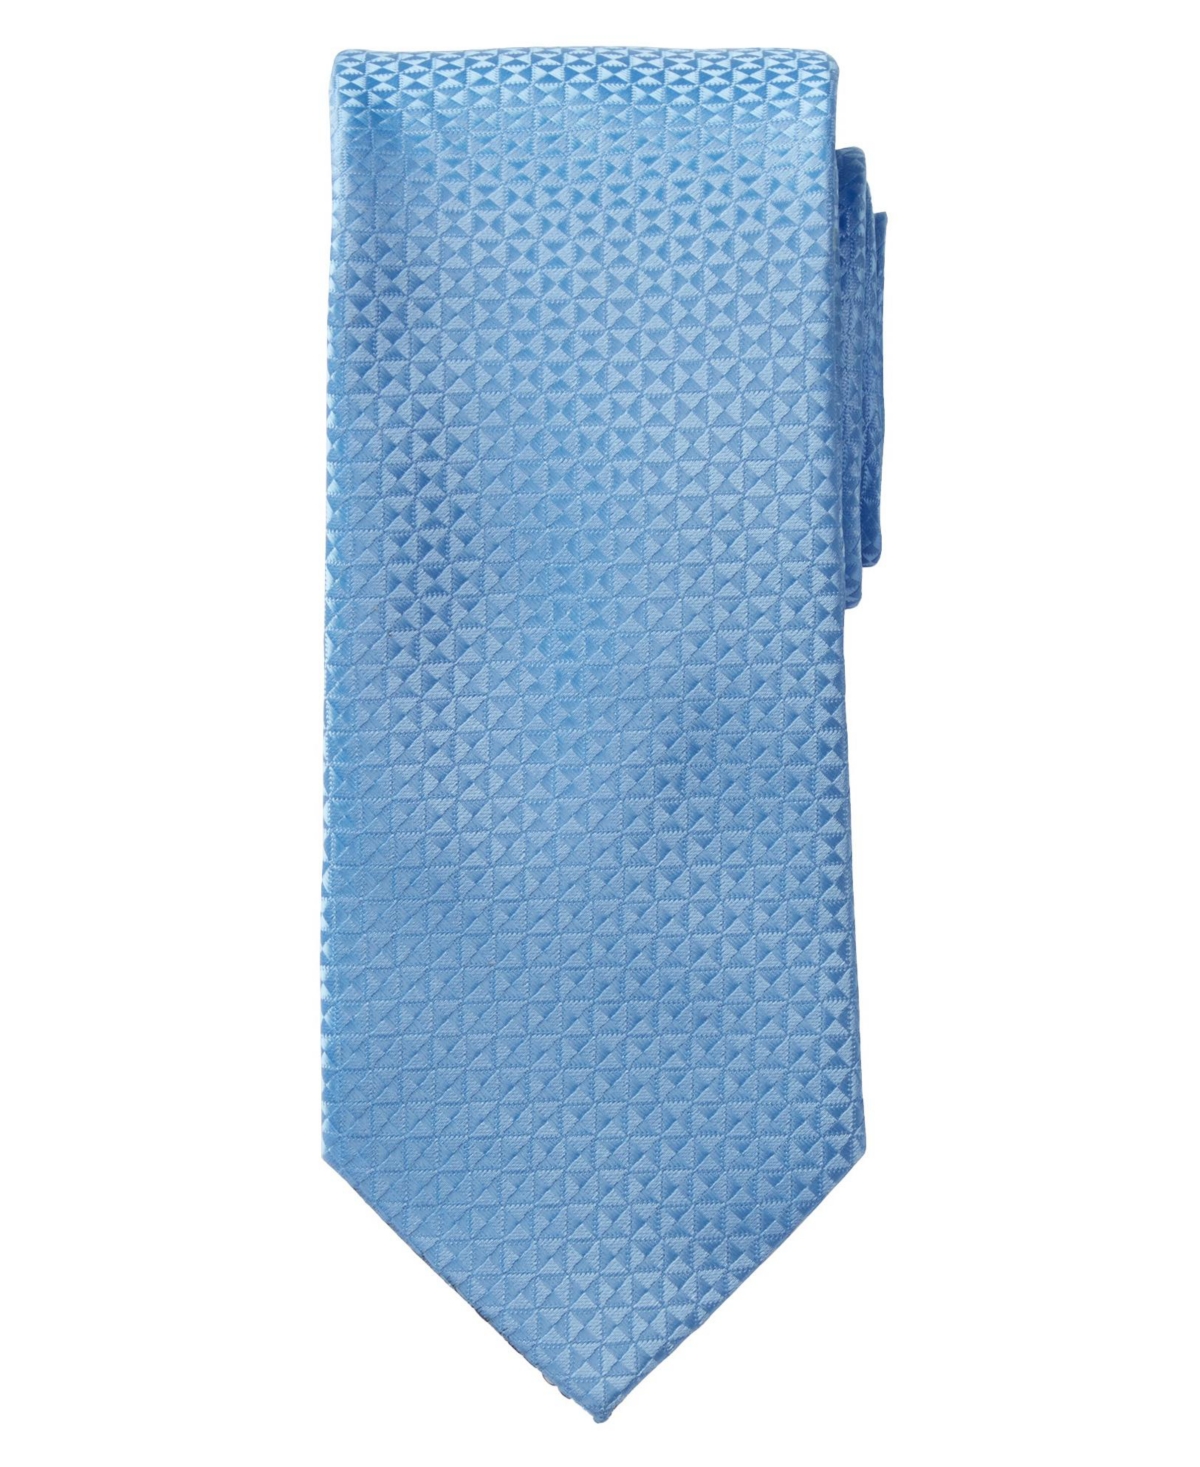 Big & Tall Ks Signature Collection Extra Long Classic Textured Tie - Pale blue